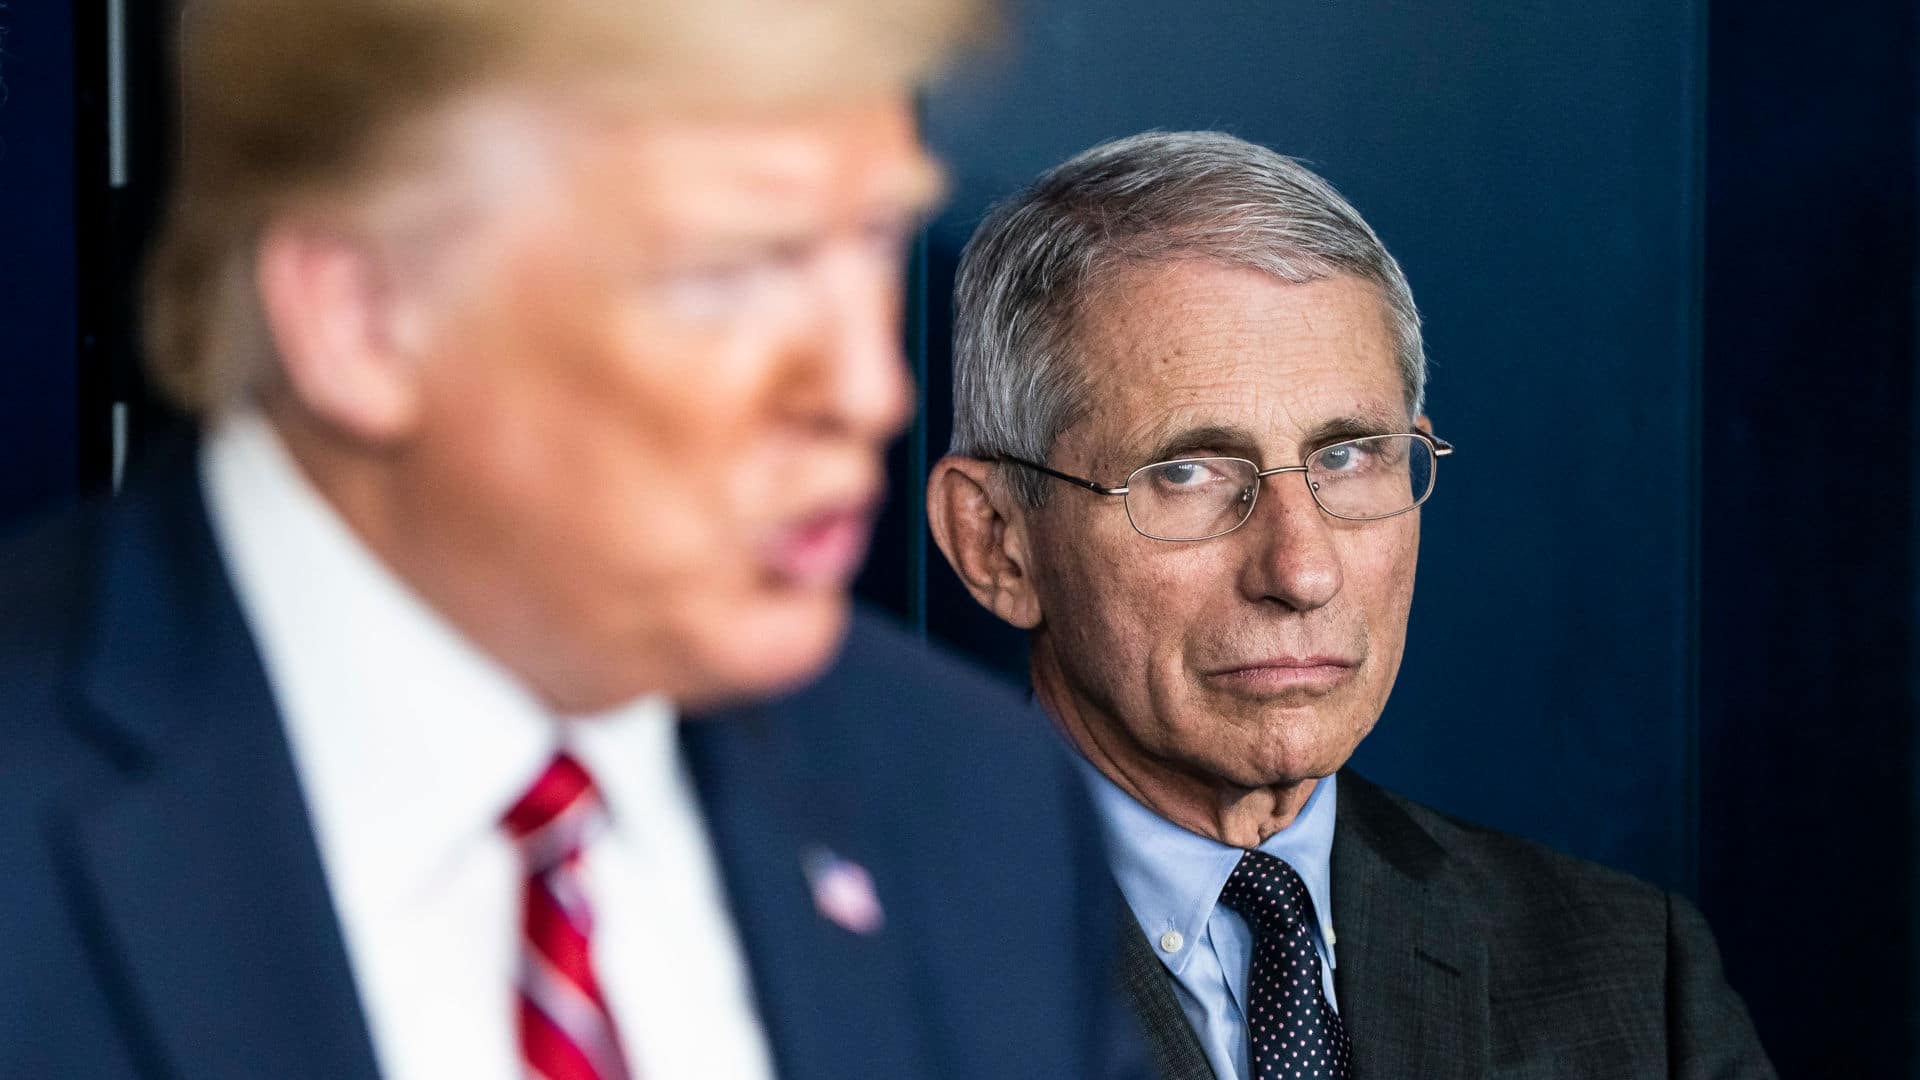 Anthony Fauci, National Institute for Allergy and Infectious Diseases Director, listens as then-President Donald Trump speaks with the coronavirus task force in March 2020.